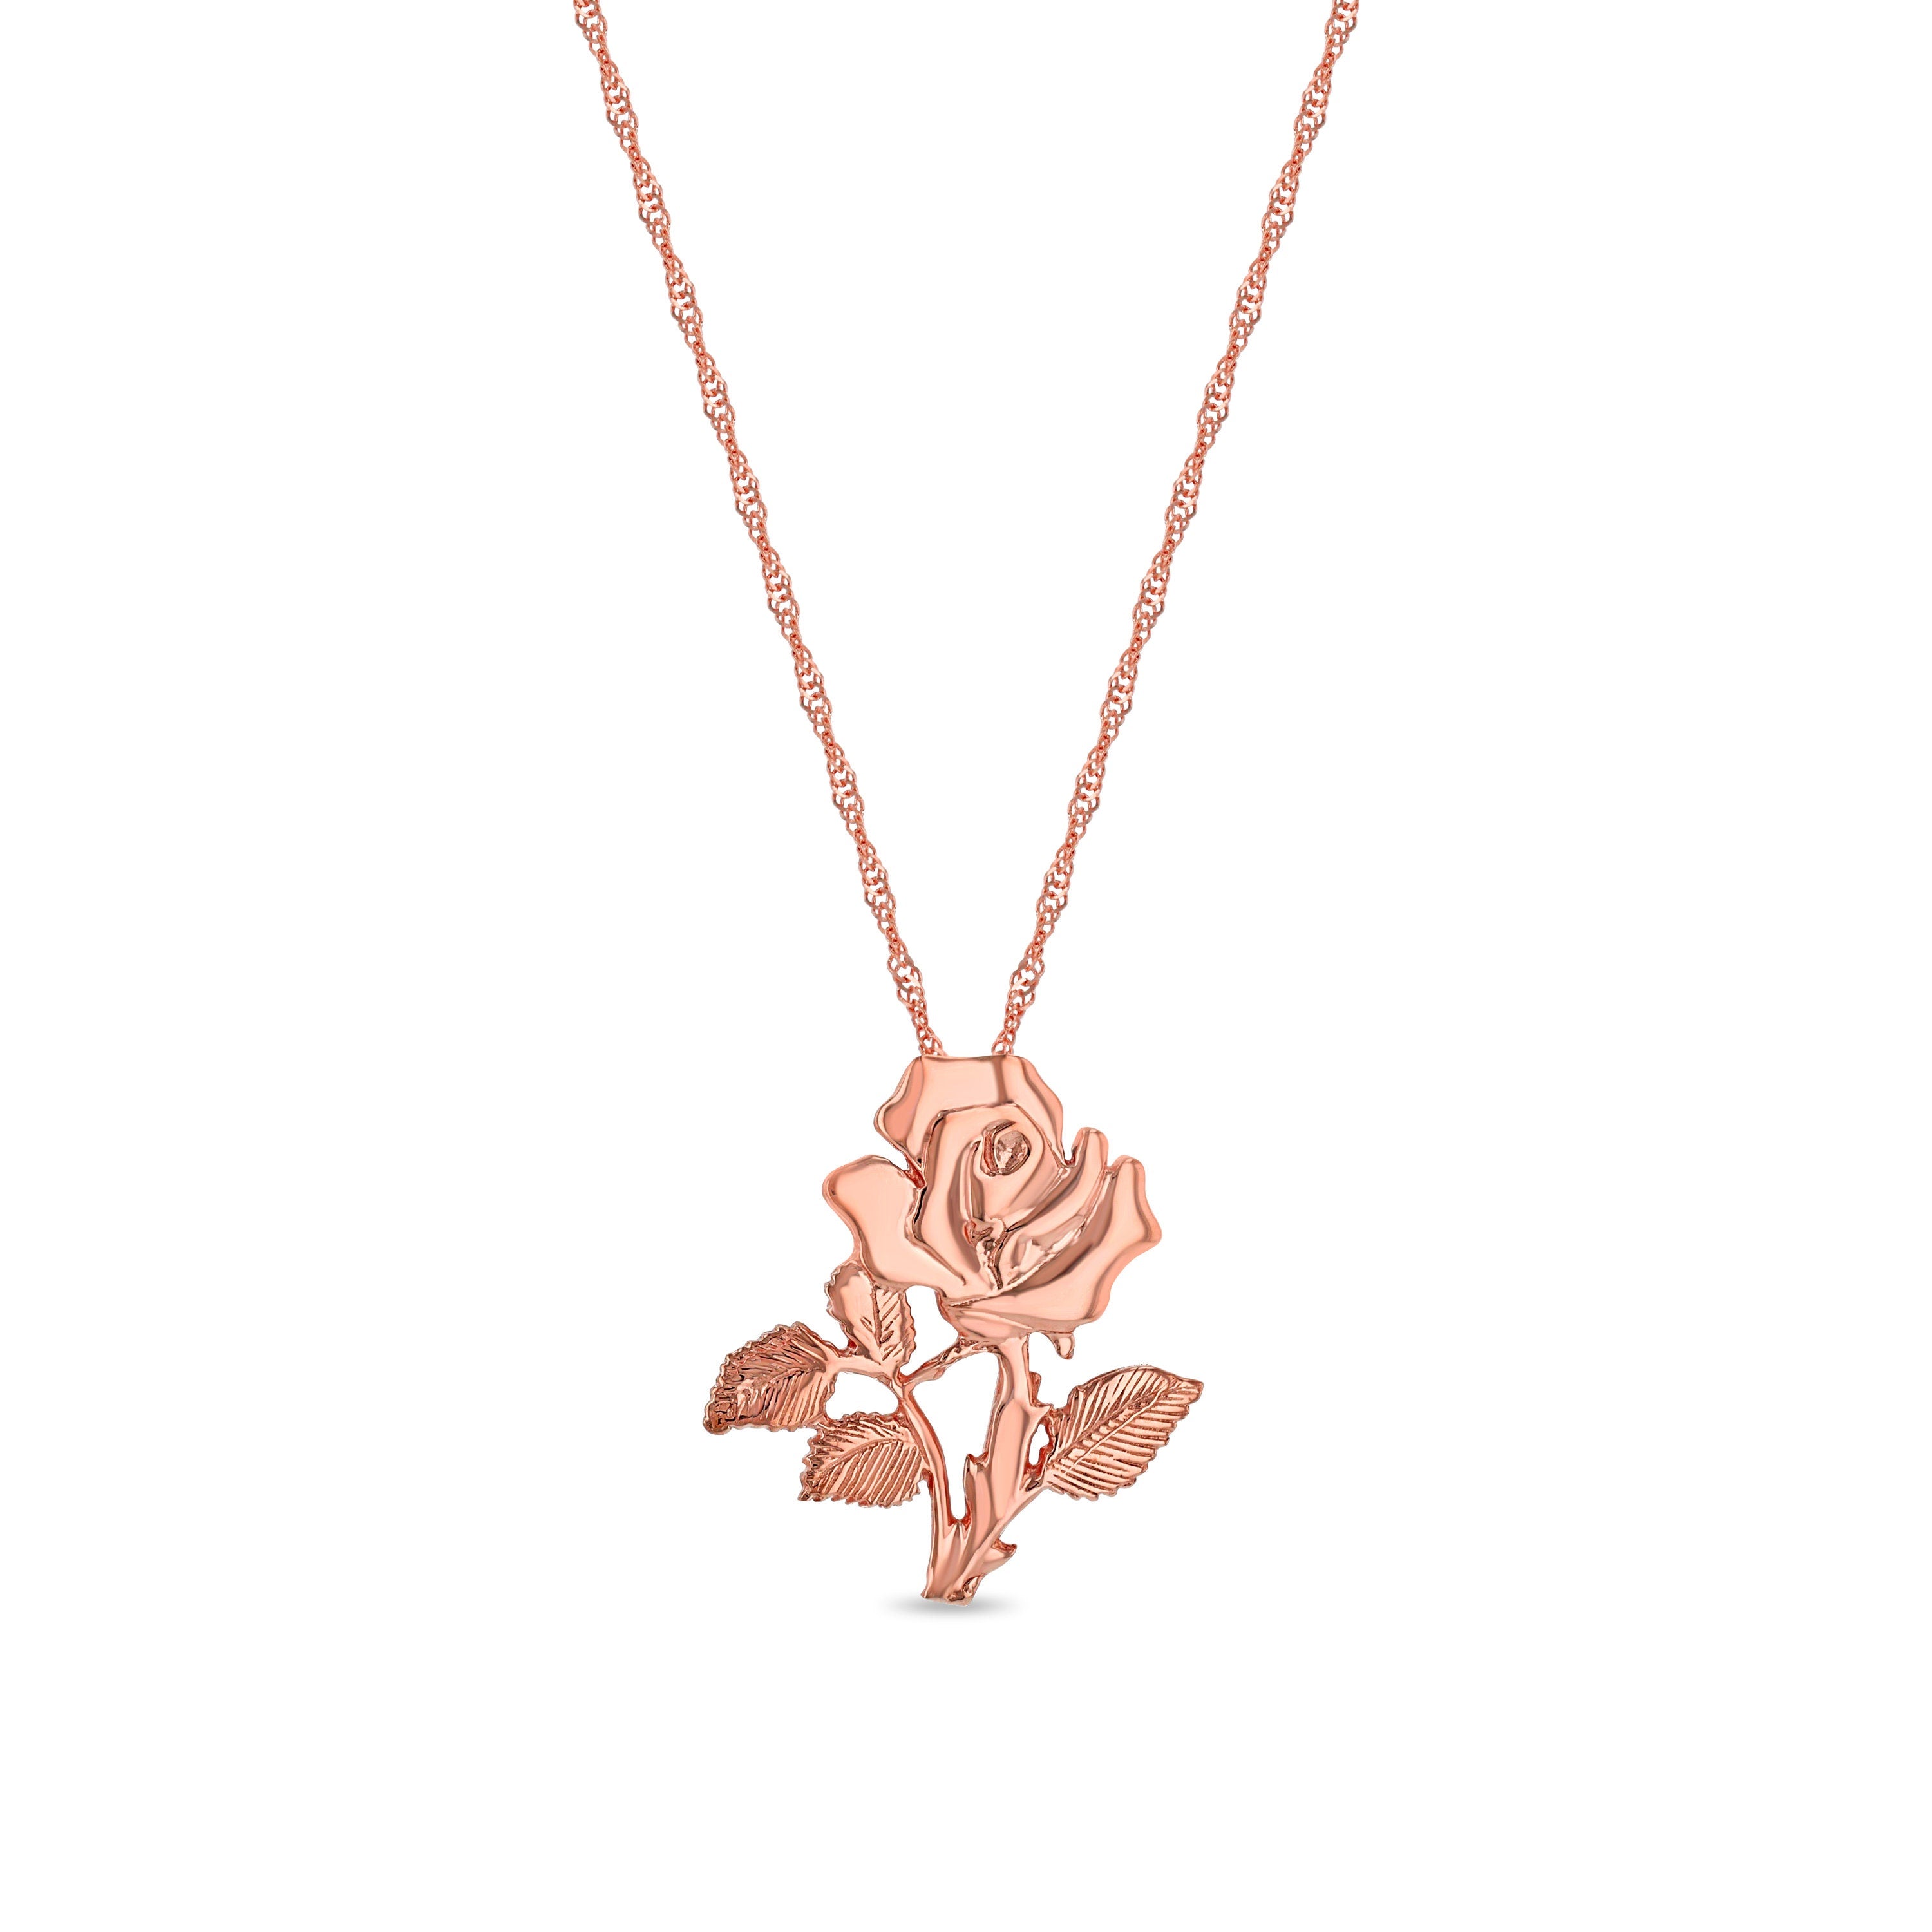 14k solid gold rose pendant on 18" solid gold chain